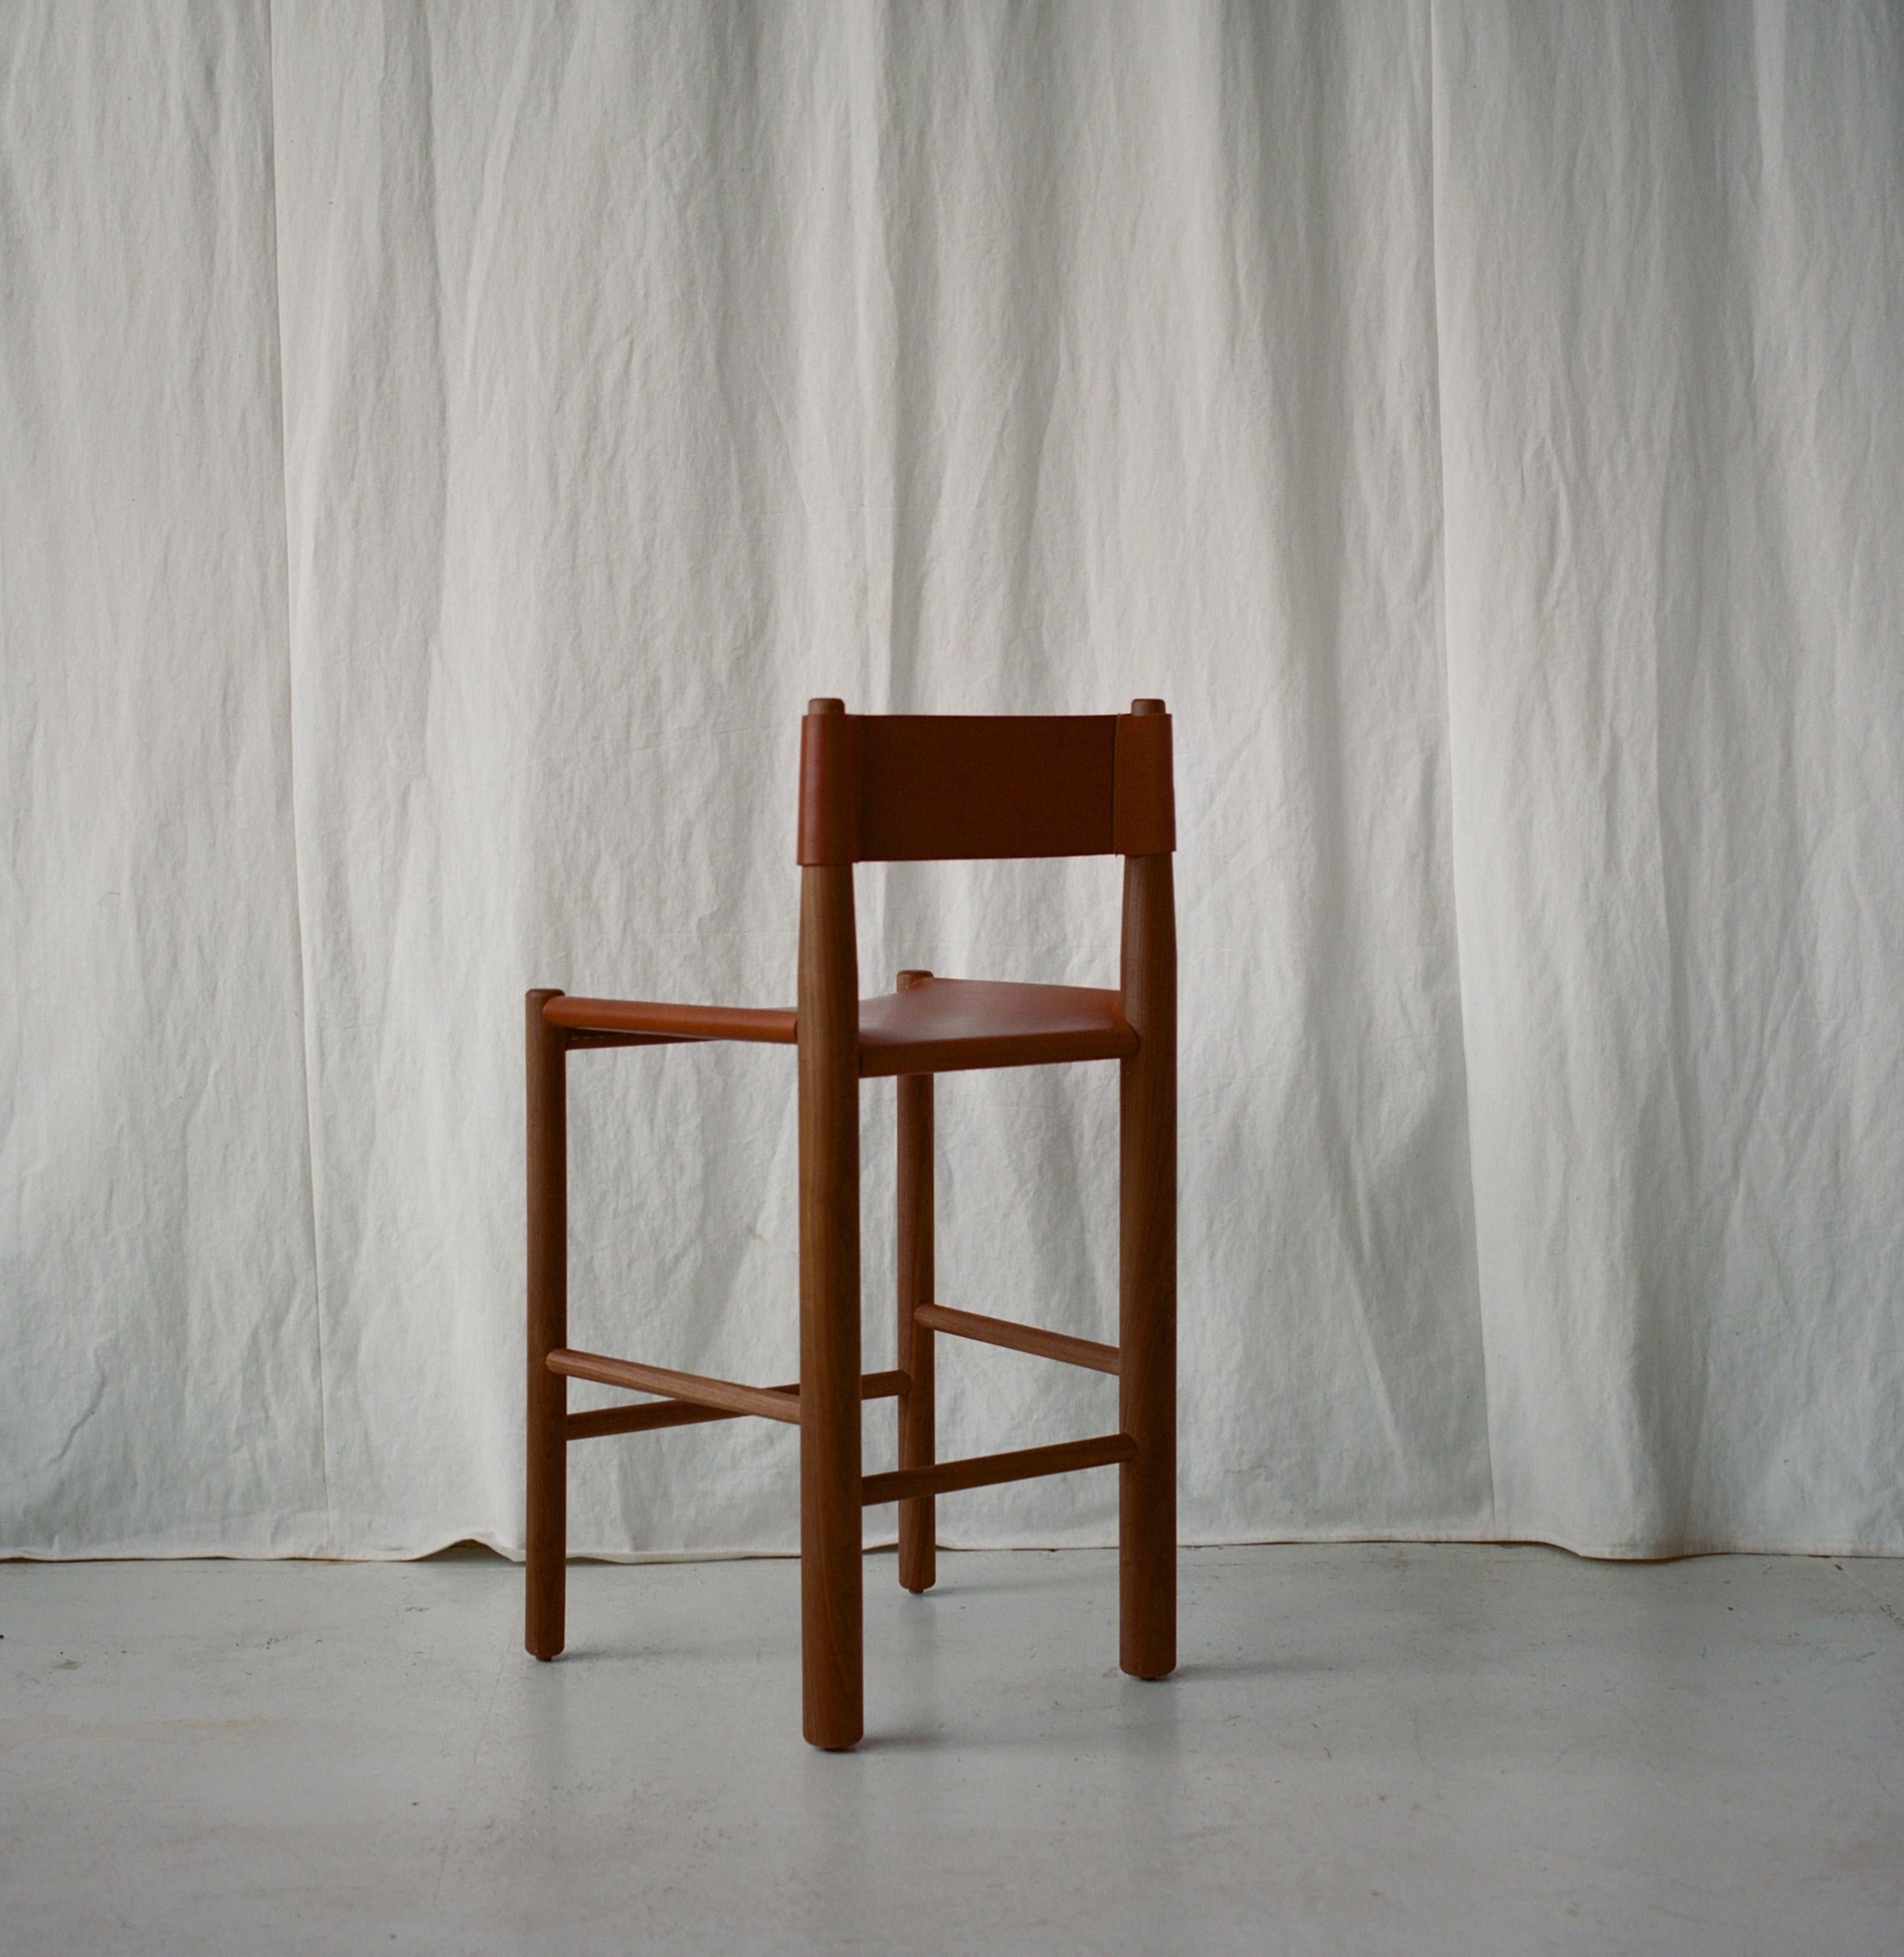 Inspired by utilitarian furniture, the Gradual Counter Stool plays with the proportions of different size turned wood parts. The front and back legs are different diameters, and the back tapers, declining gradually to allow for a slung leather back.